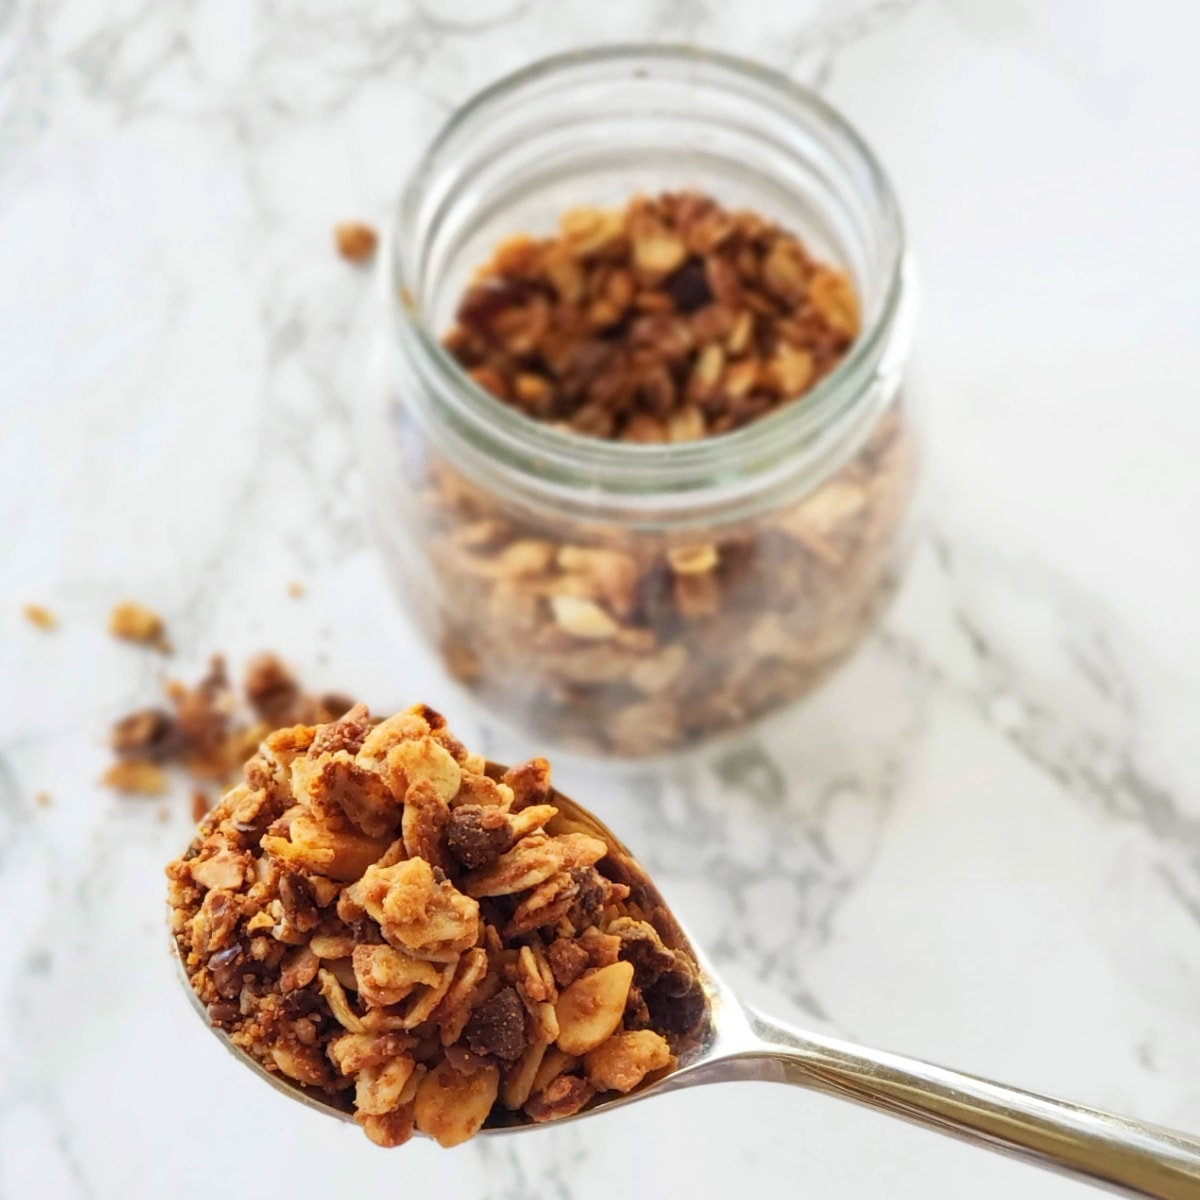 A spoon with granola in it in foreground and a clear glass jar of granola in background on a white marble counter